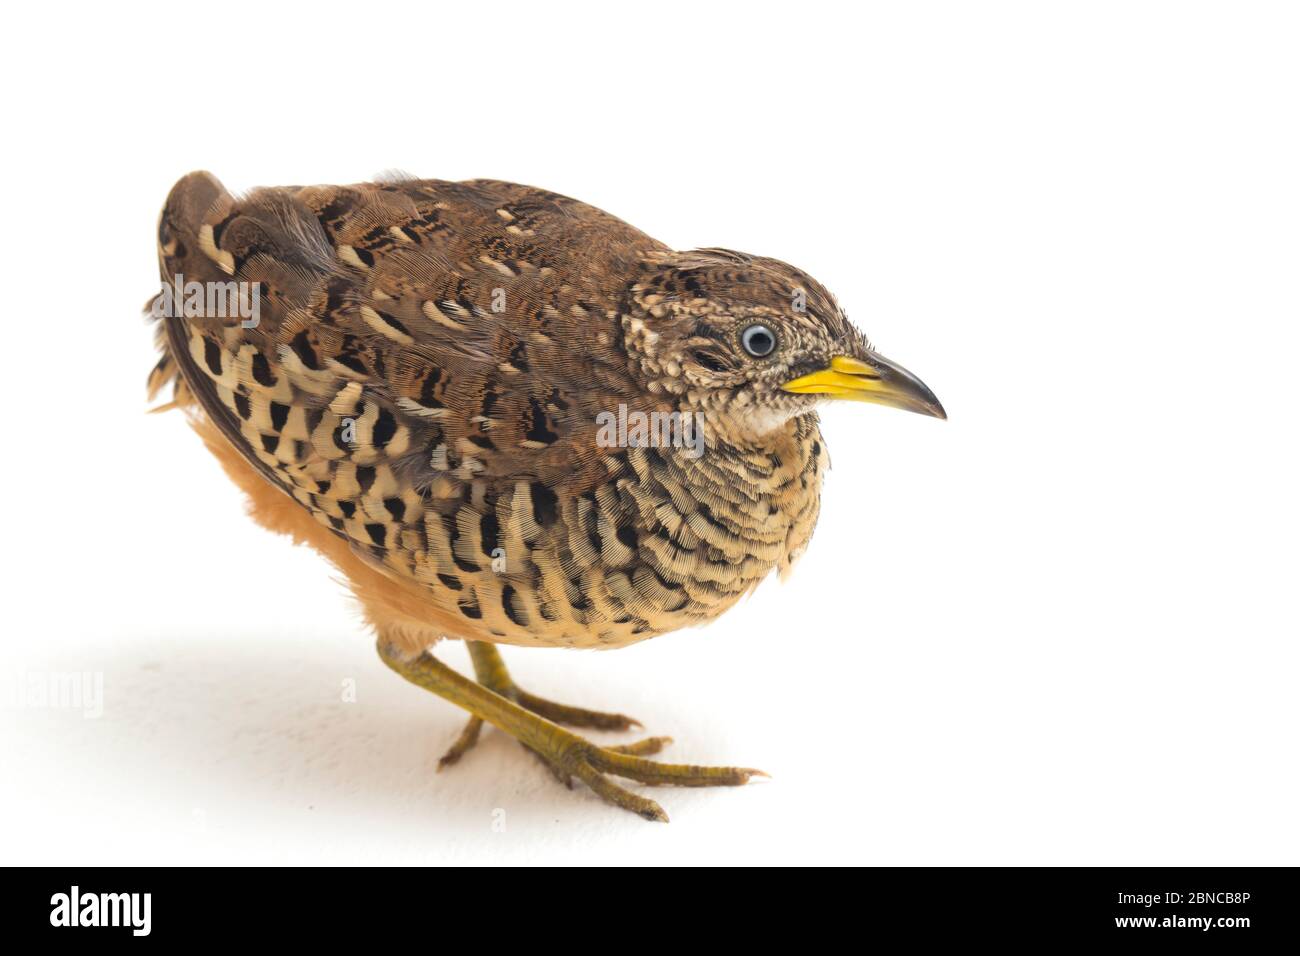 A male barred buttonquail or common bustard-quail (Turnix suscitator) isolated on white background Stock Photo